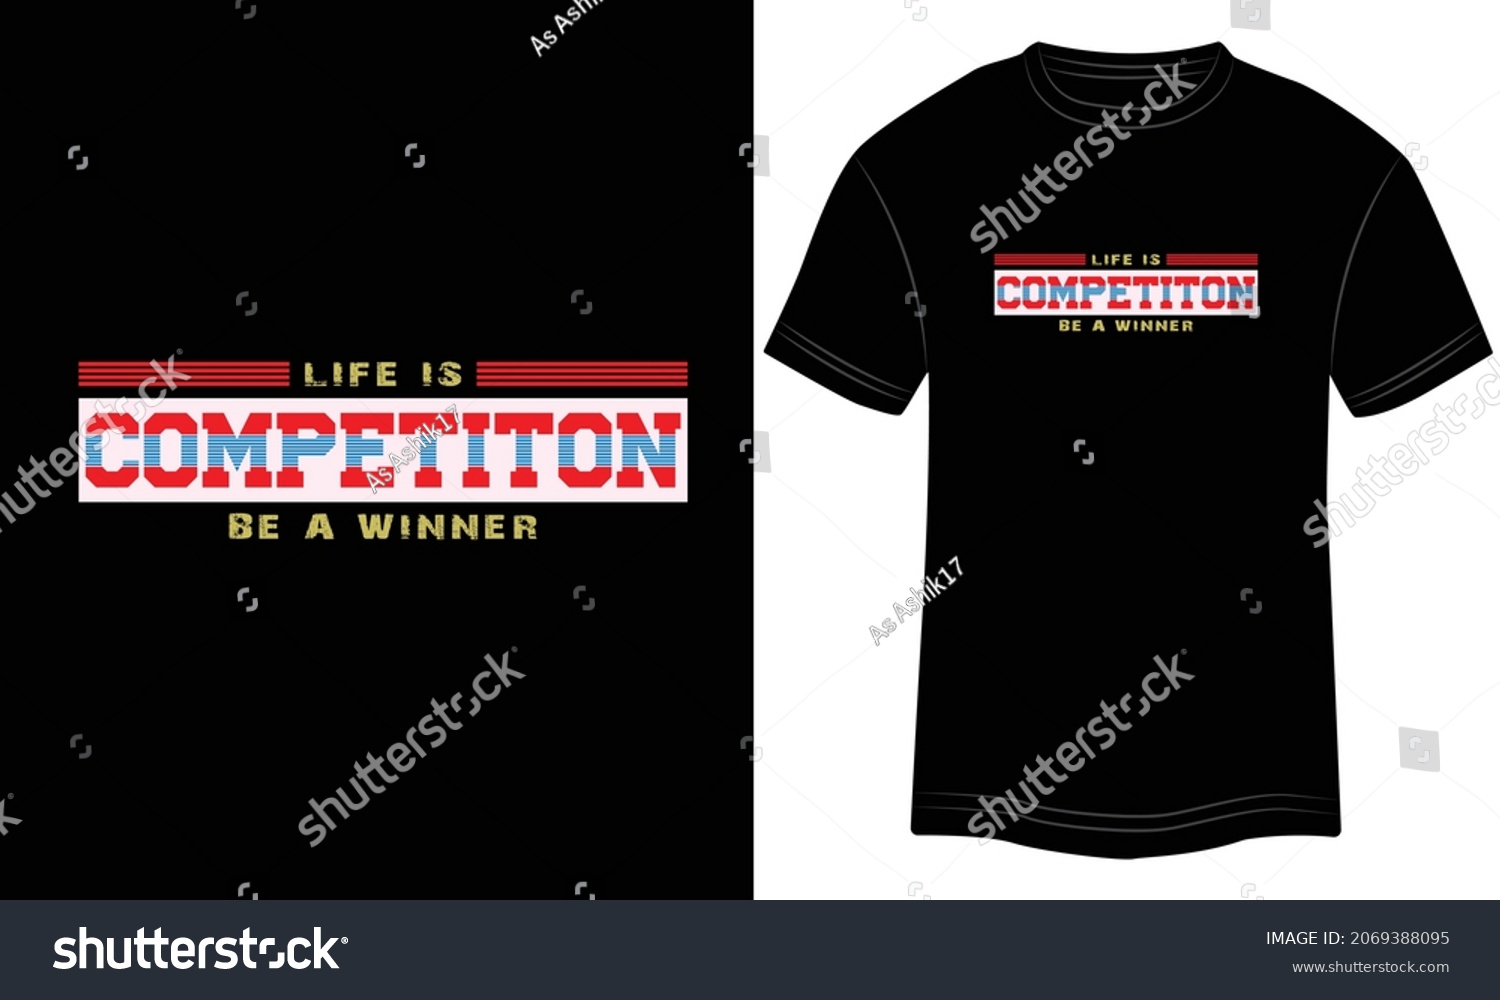 SVG of Life Competiton Be a Winner Typography T-shirt graphics, tee print design, vector, slogan. Motivational Text, Quote
Vector illustration design for t-shirt graphics. svg